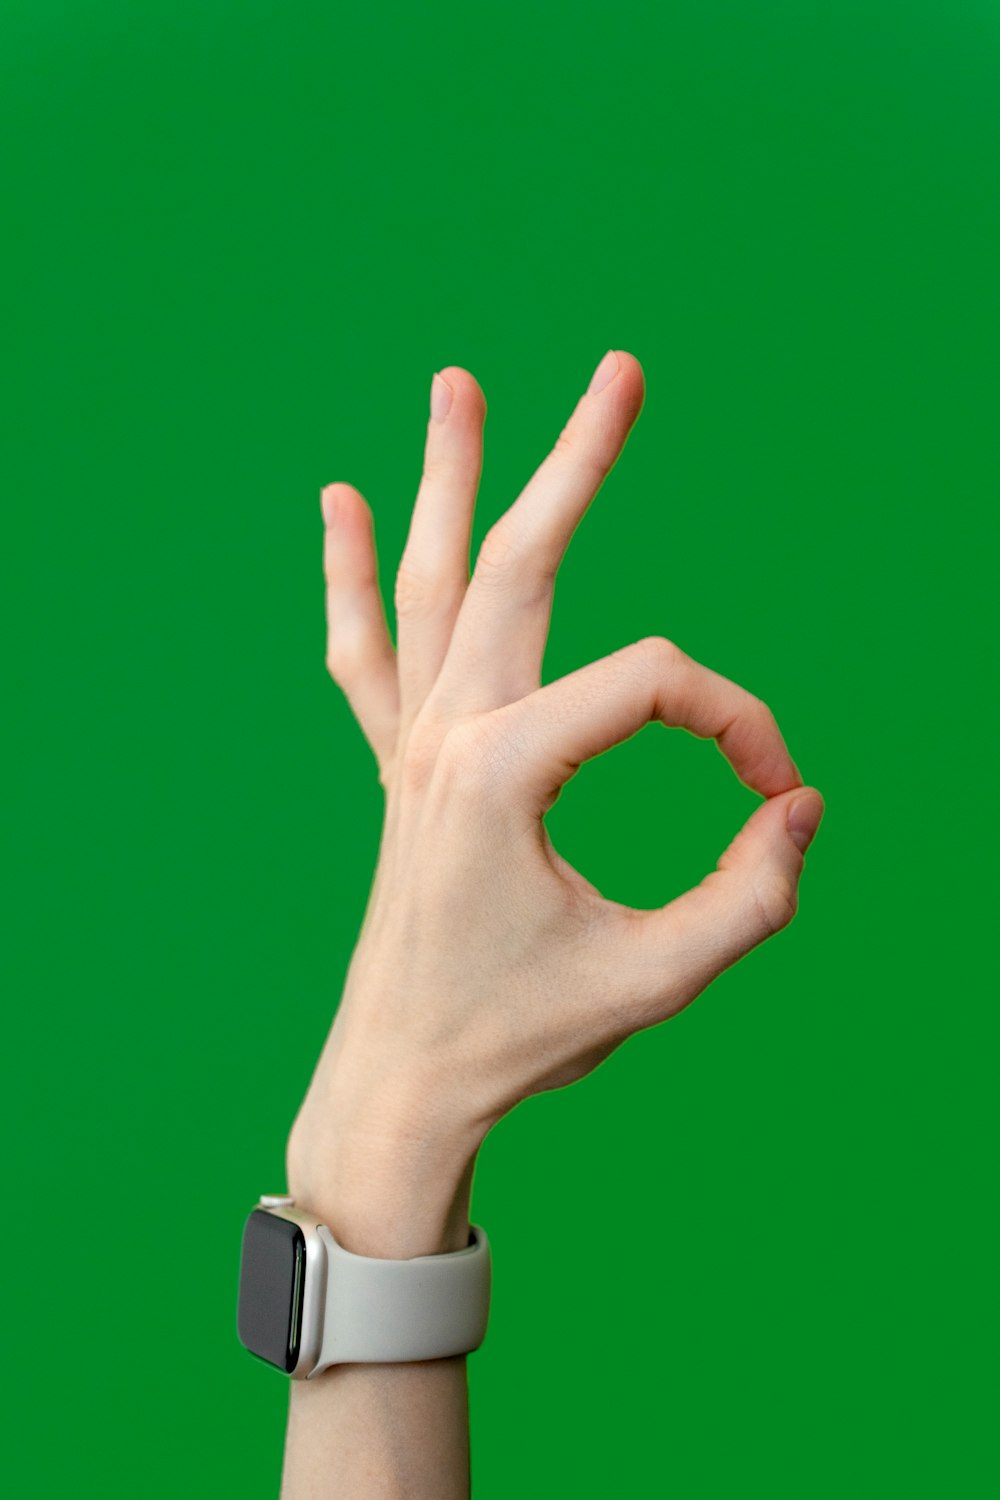 a person making a peace sign with their hand